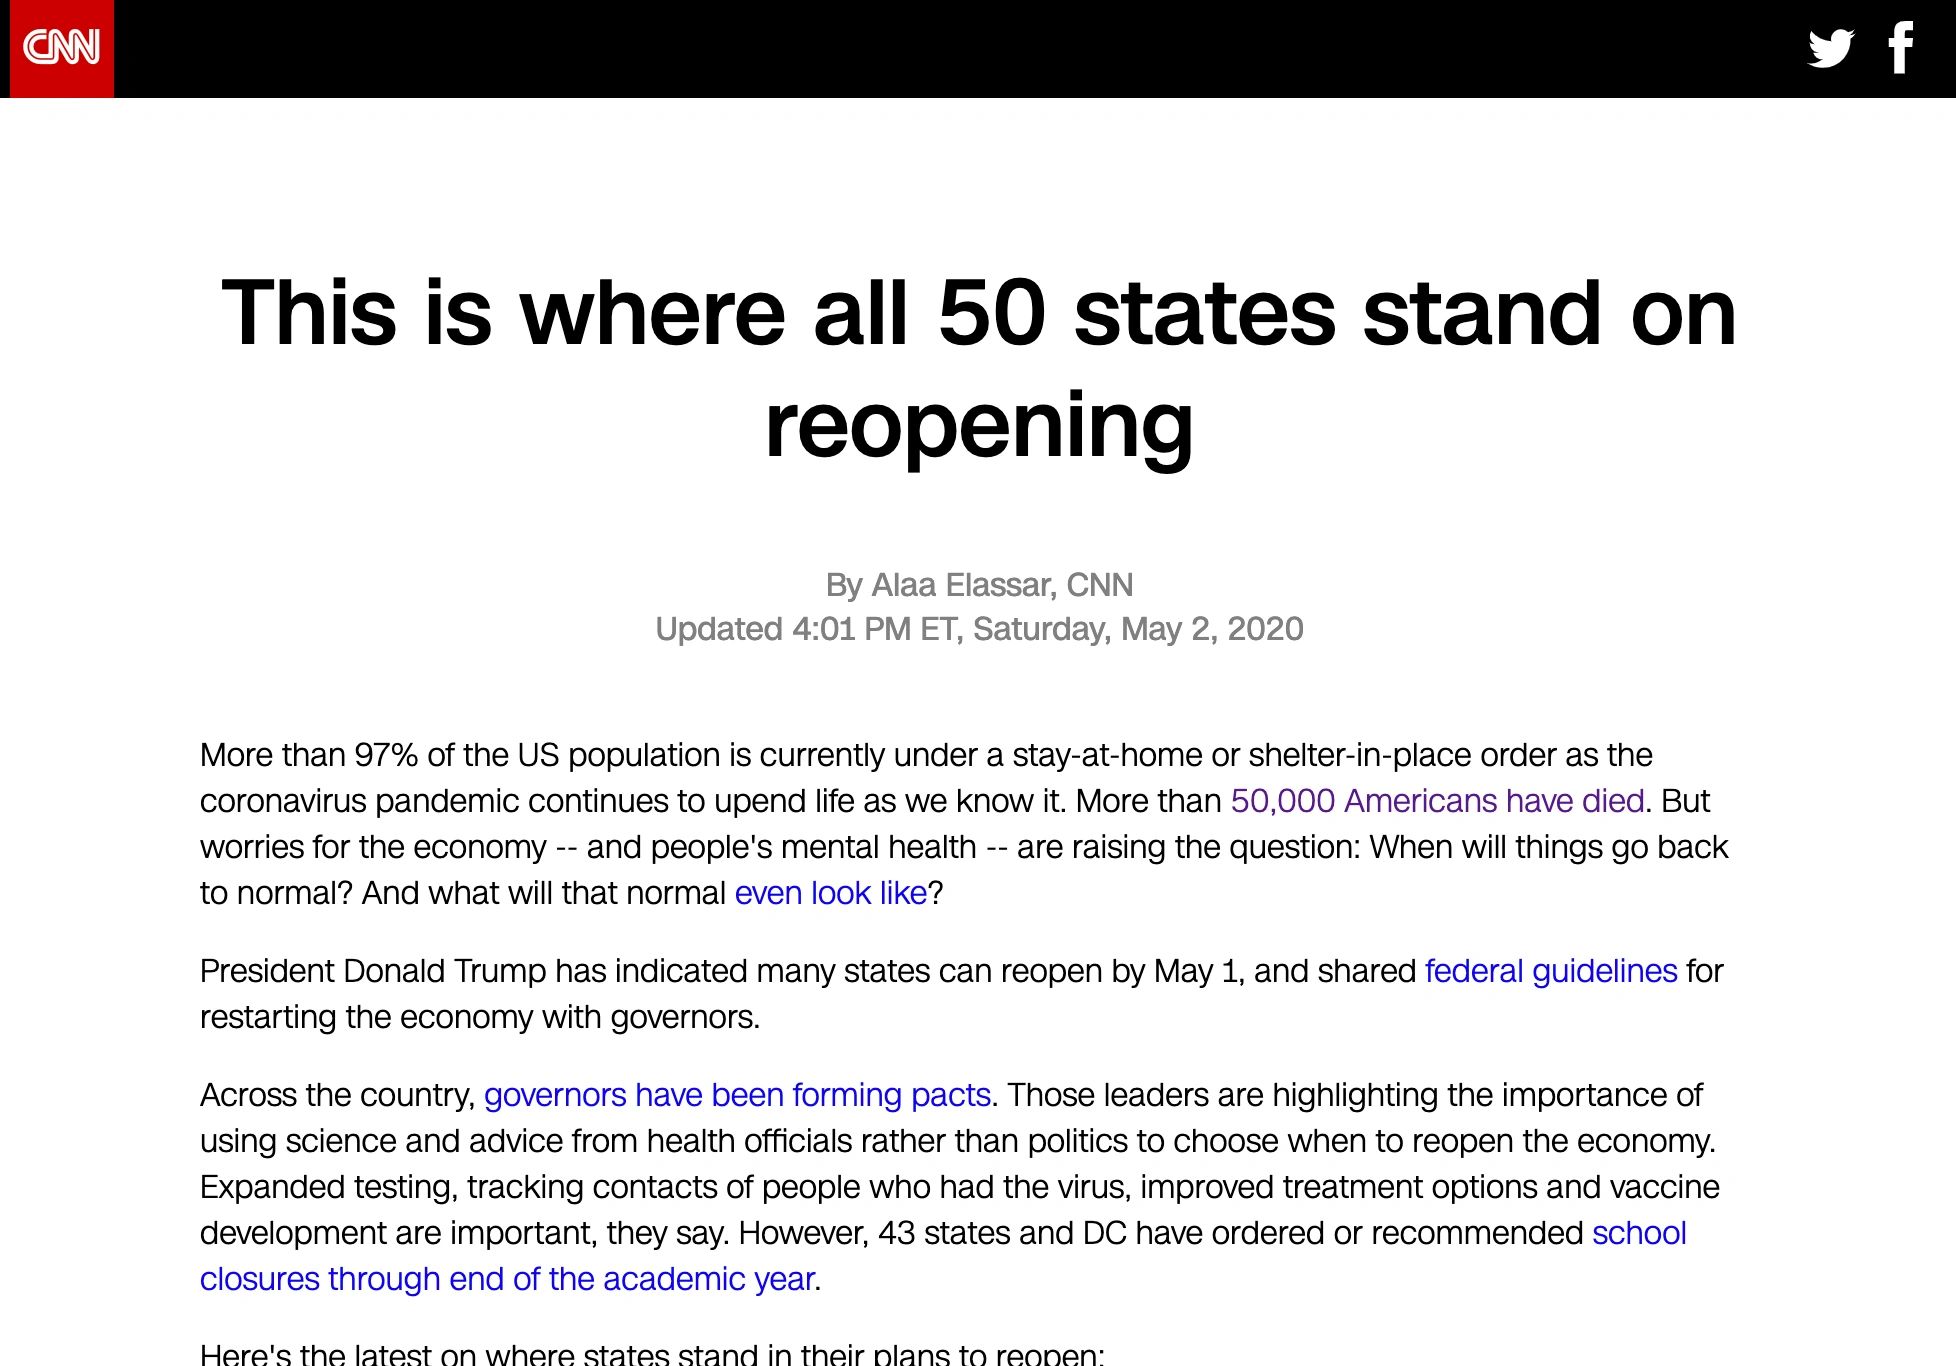 cnn news report of 50 states opening up